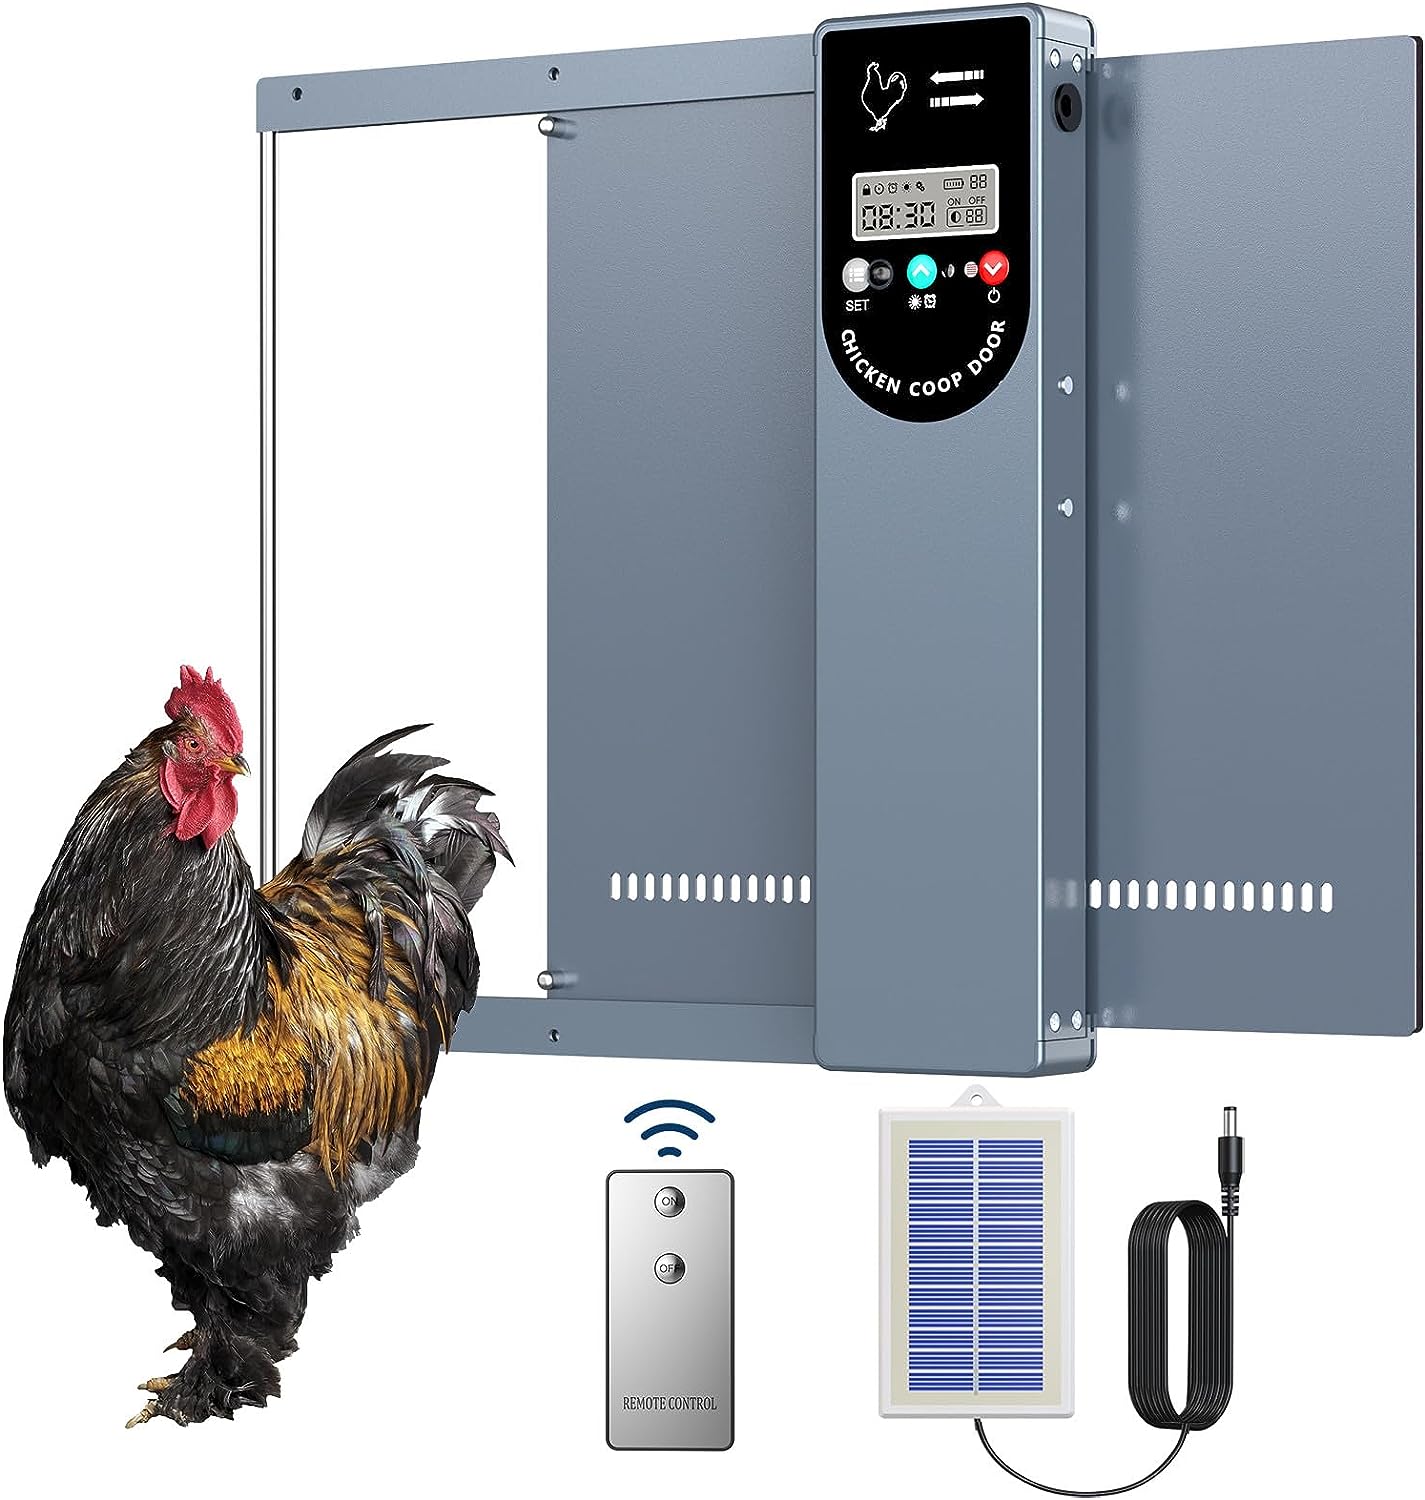 Automatic Chicken Coop Door Solar Powered – Auto Chicken Door Opener with LCD Display and Timer/Light Sensor Modes for Safe and Convenient Chicken Keeping (Grey) Review